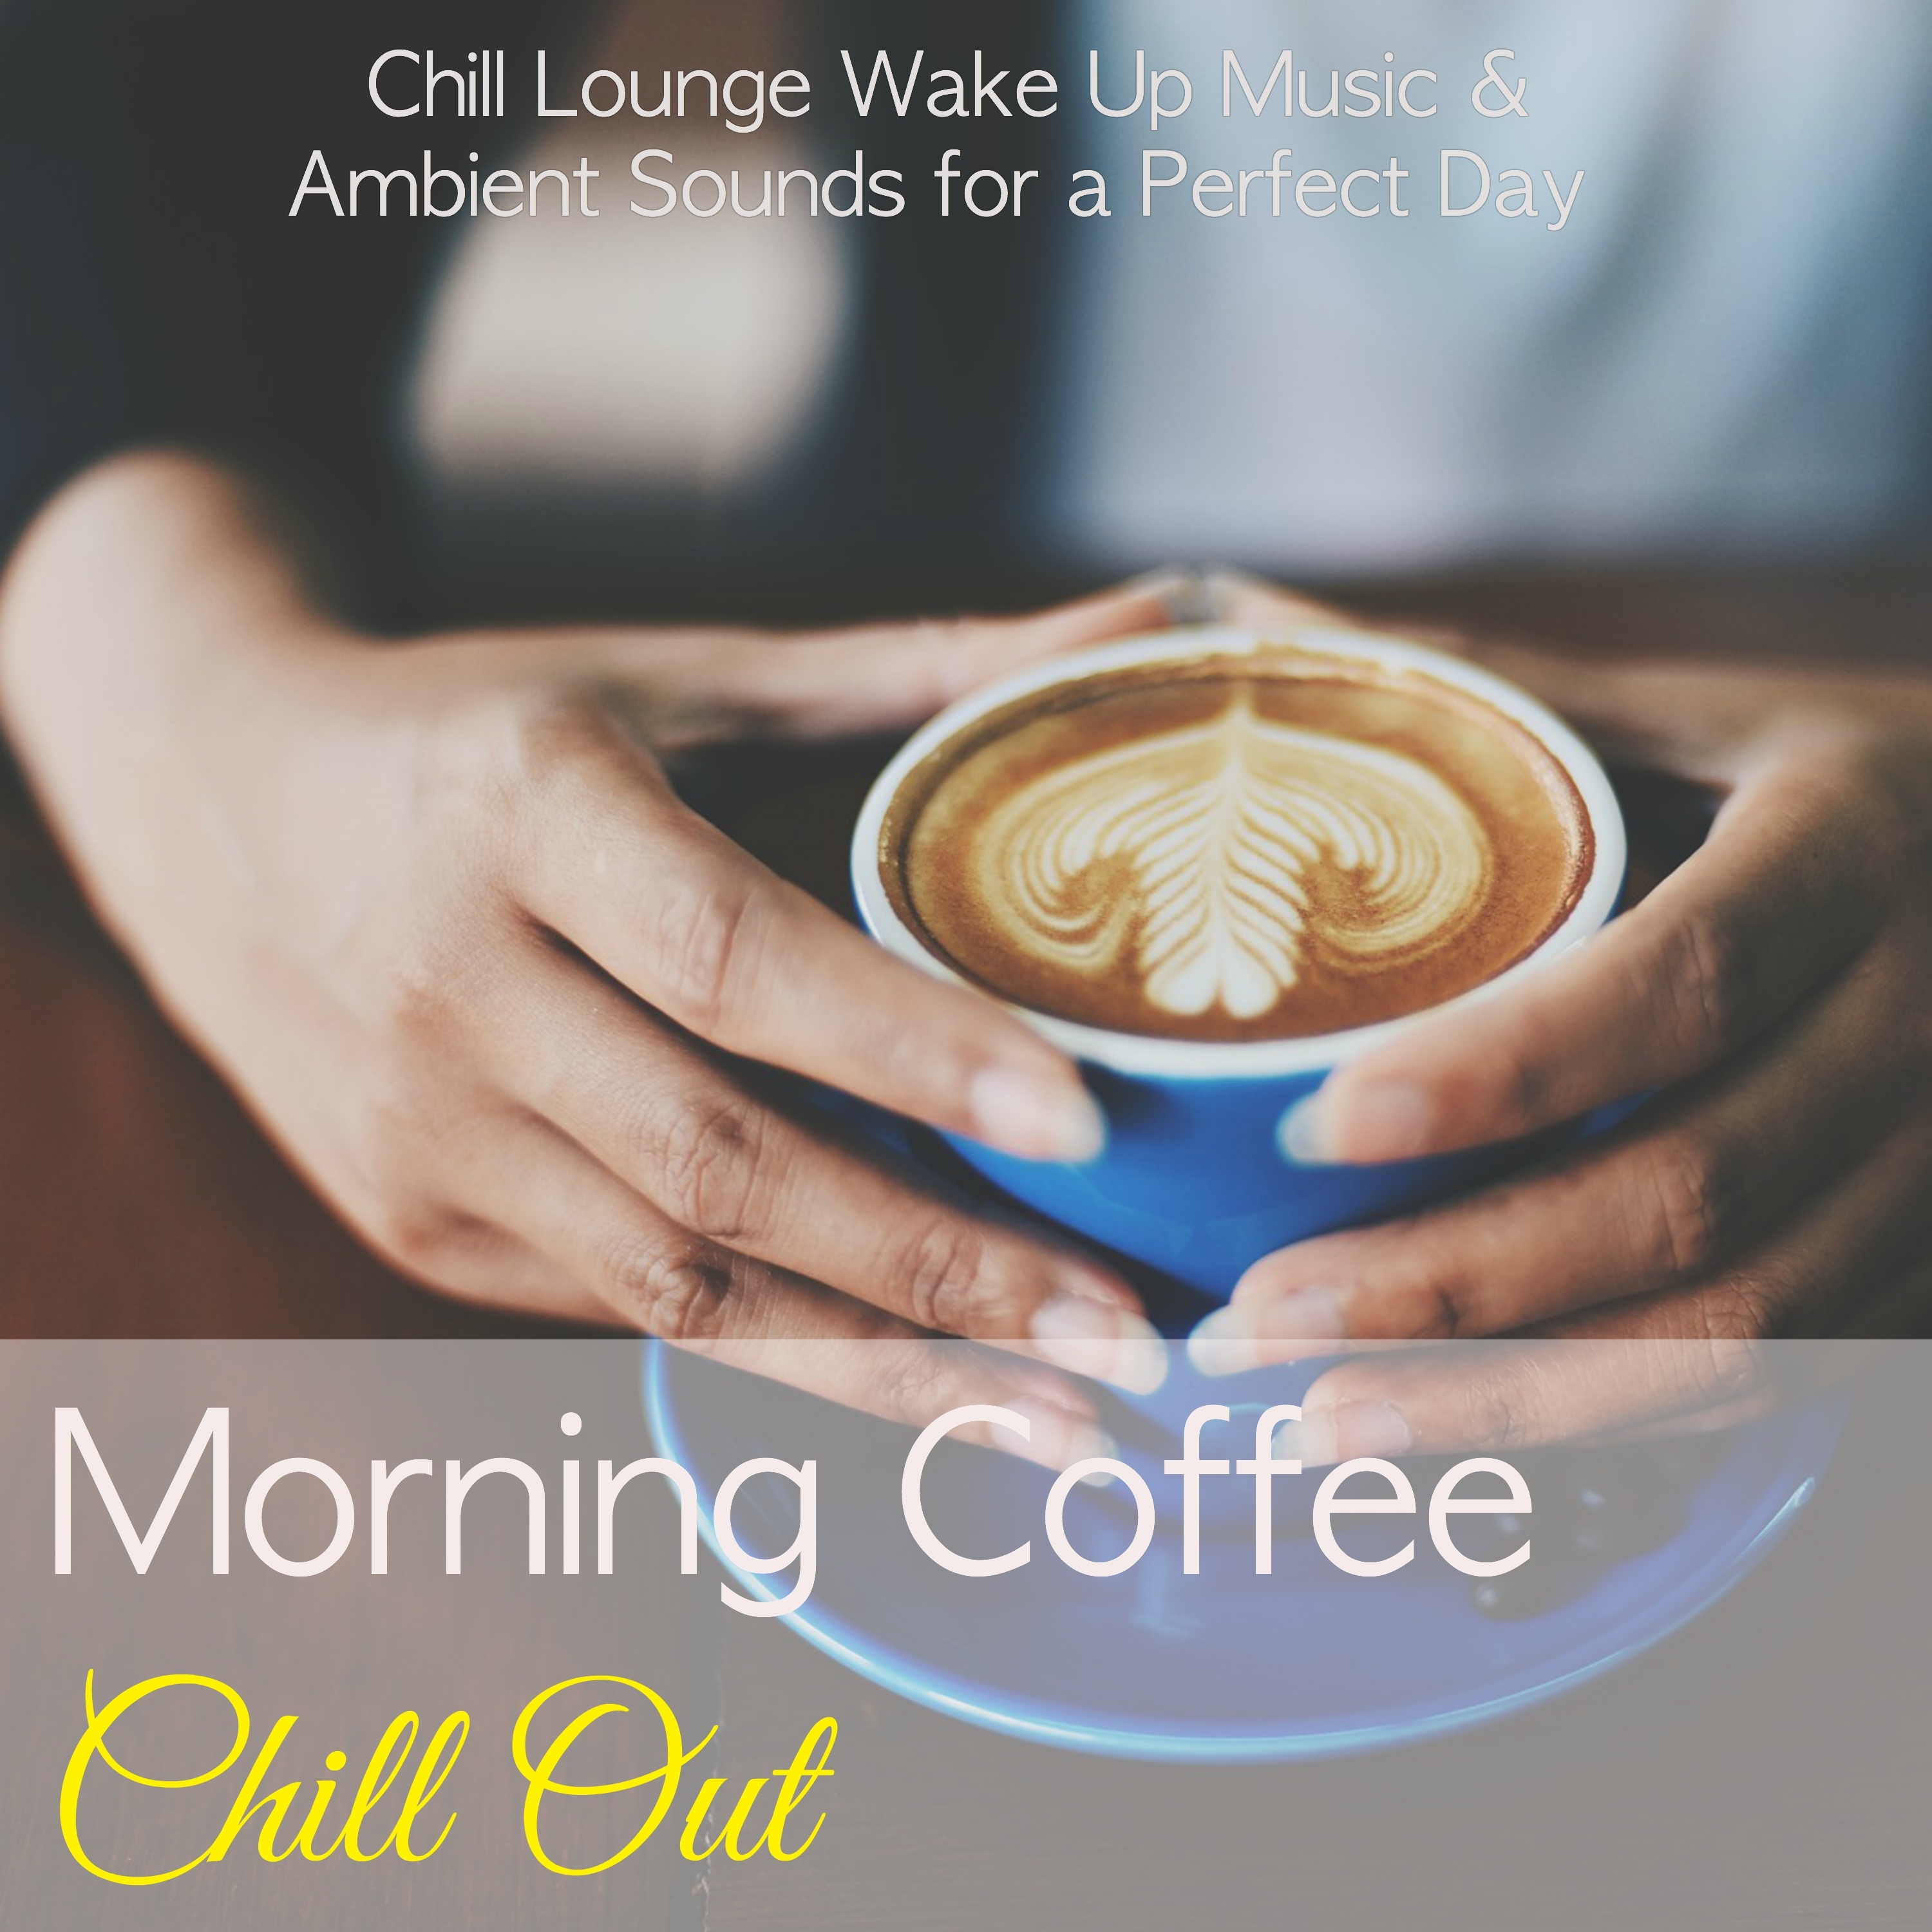 Morning Coffee Chill Out – Chill Lounge Wake Up Music & Ambient Sounds for a Perfect Day